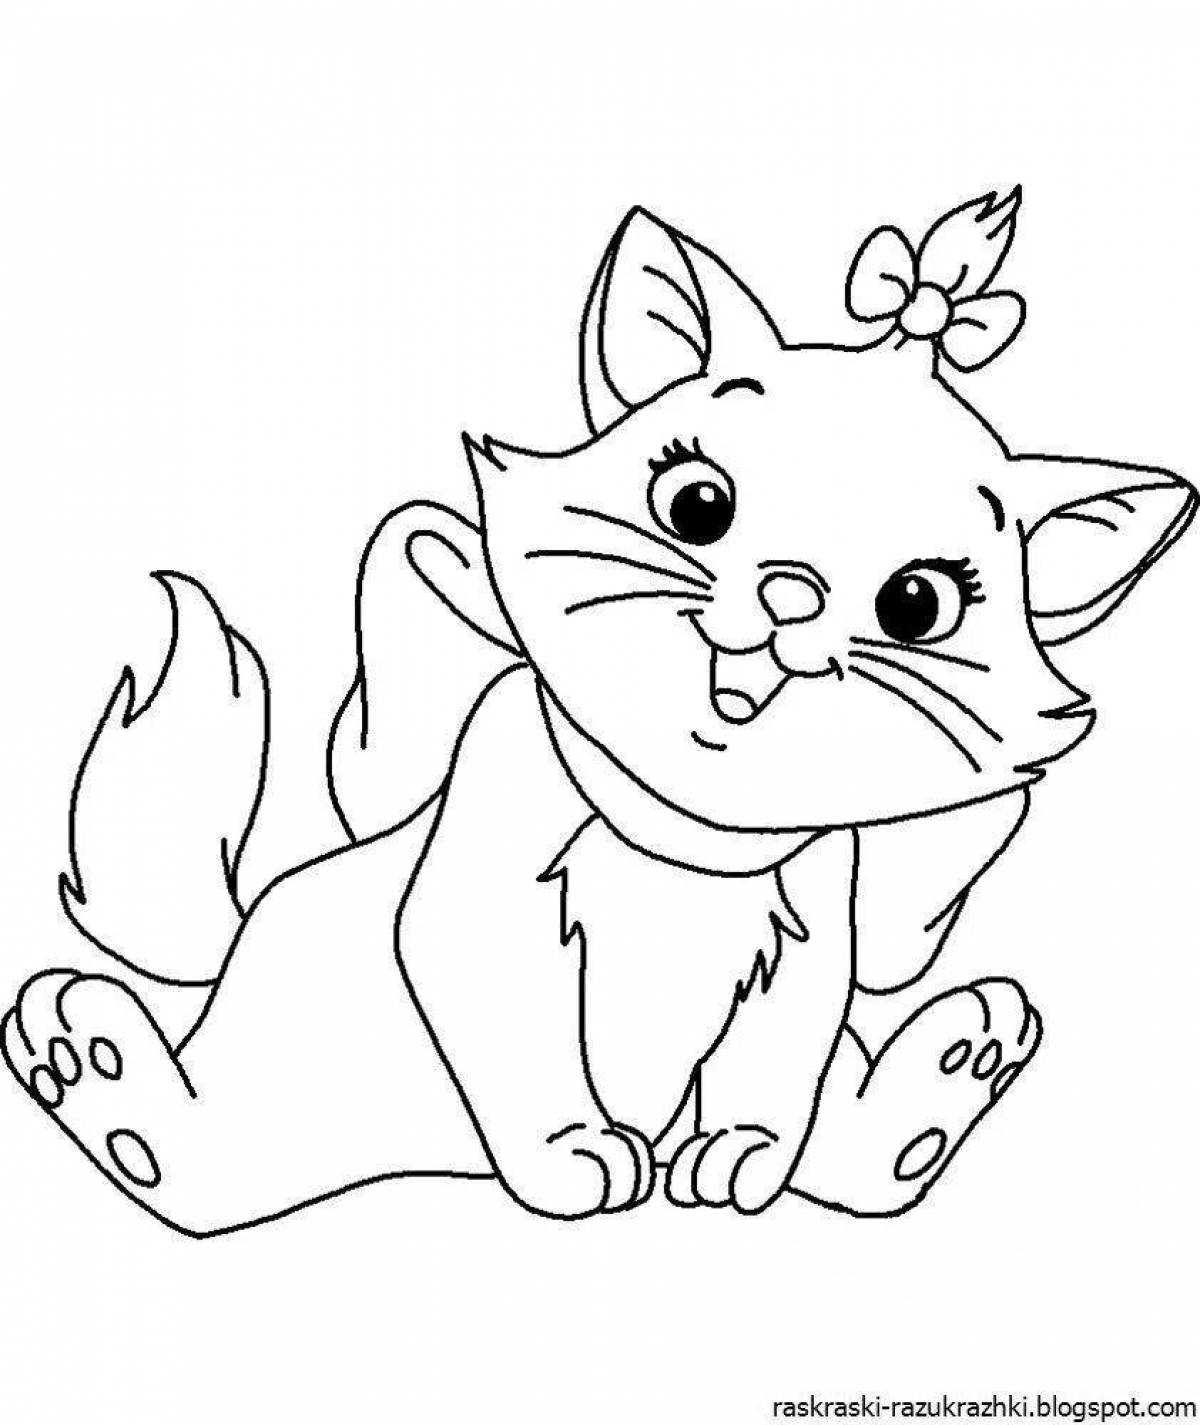 Coloring book jumping little kitty